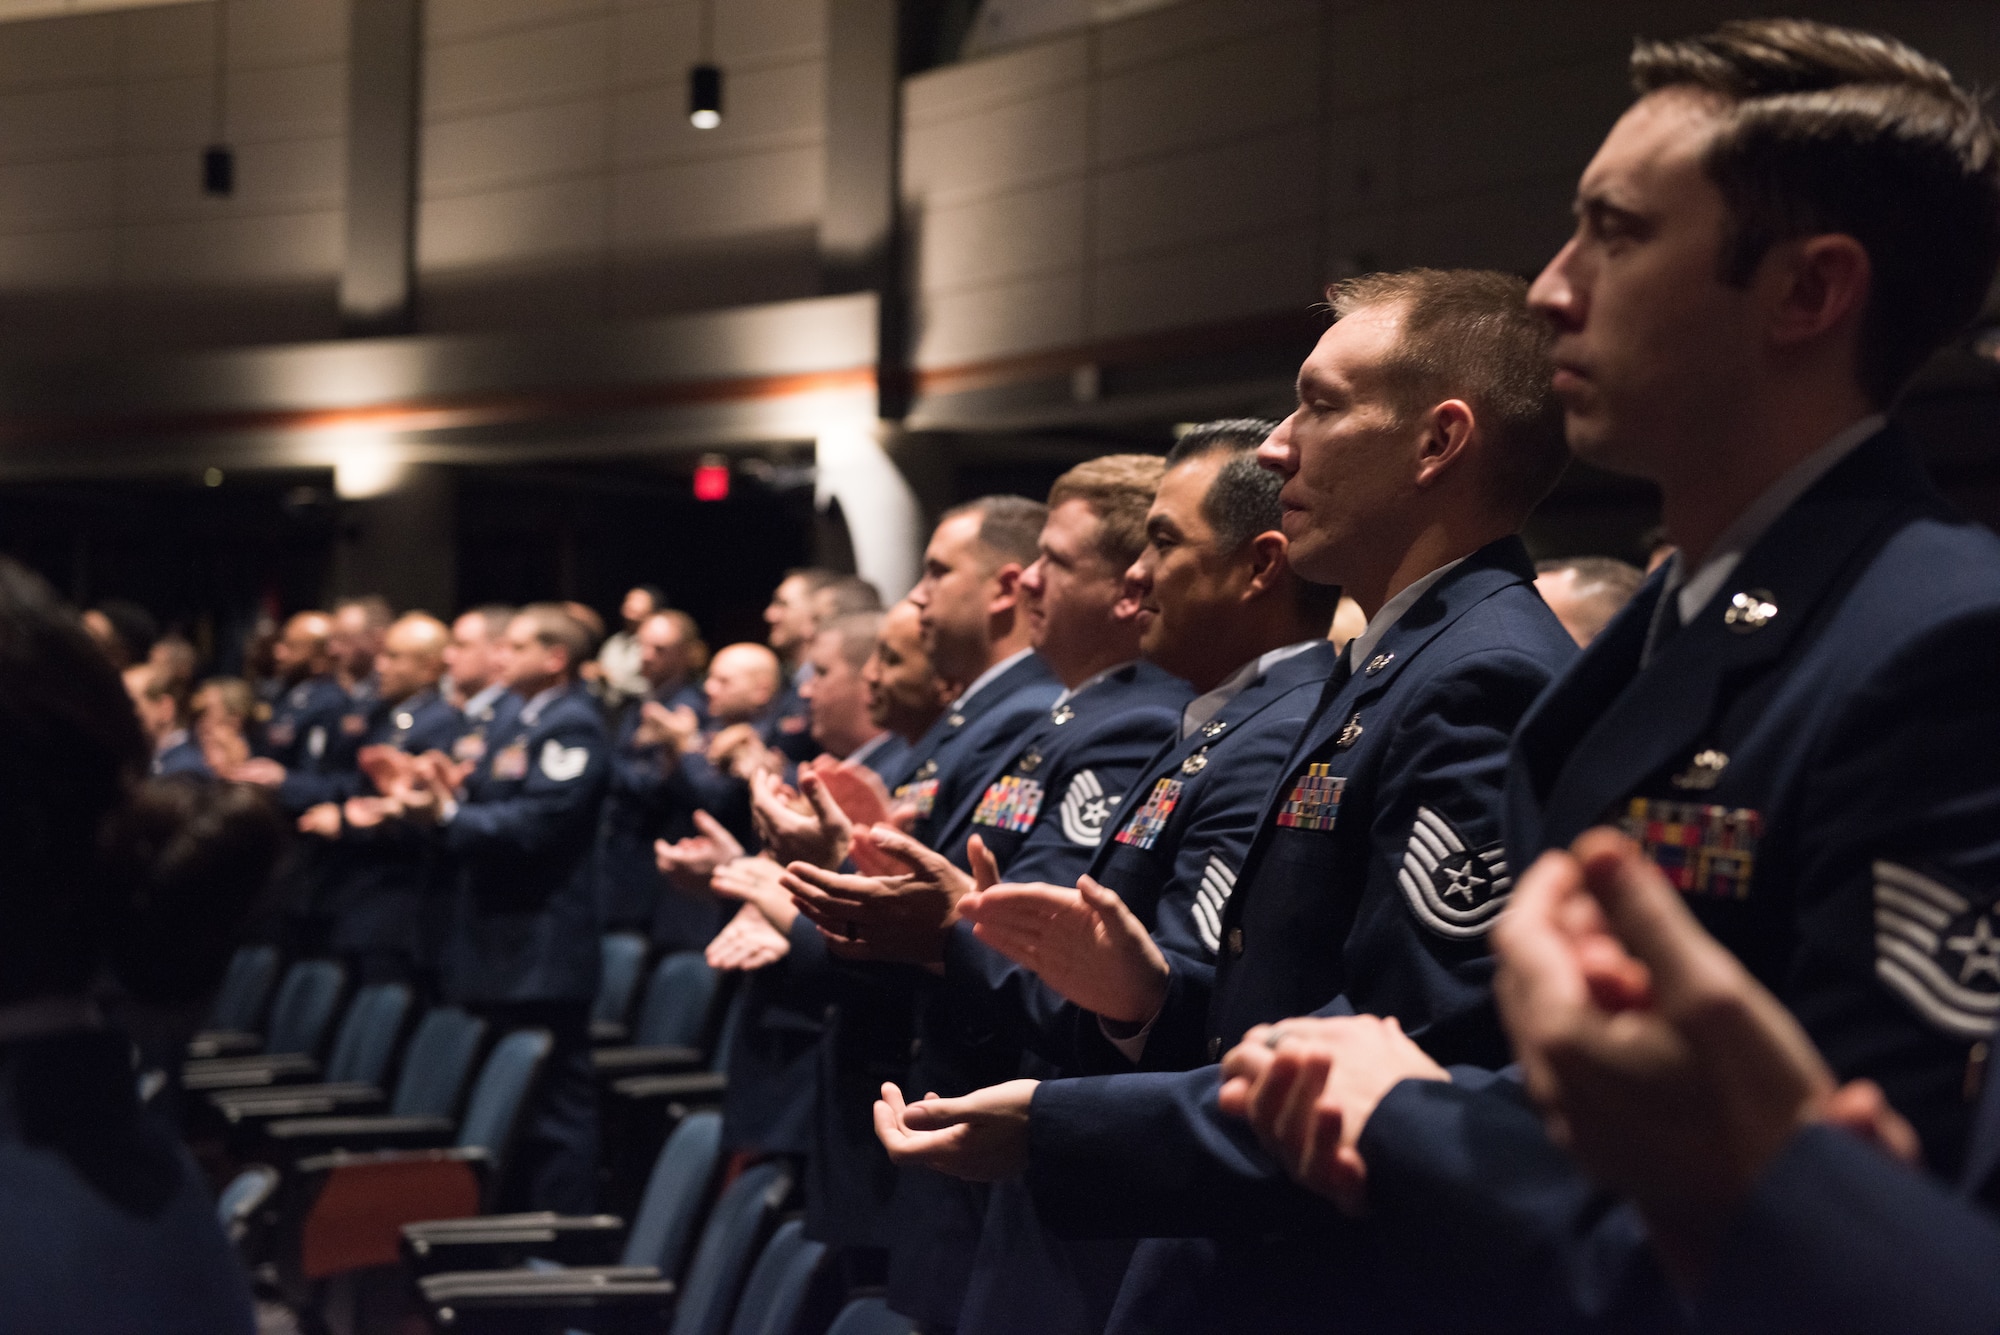 Air Force Noncommissioned Officer Academy students applaud during their graduation ceremony on Maxwell Air Force Base - Gunter Annex, Ala. The Gunter NCO Academy, which reopened in April 2019 to become the temporary home of the Airey NCO Academy after Hurricane Michael, is closing indefinitely once the current class graduates on May 12, 2023 (U.S. Air Force photo by Airman 1st Class Charles Welty)